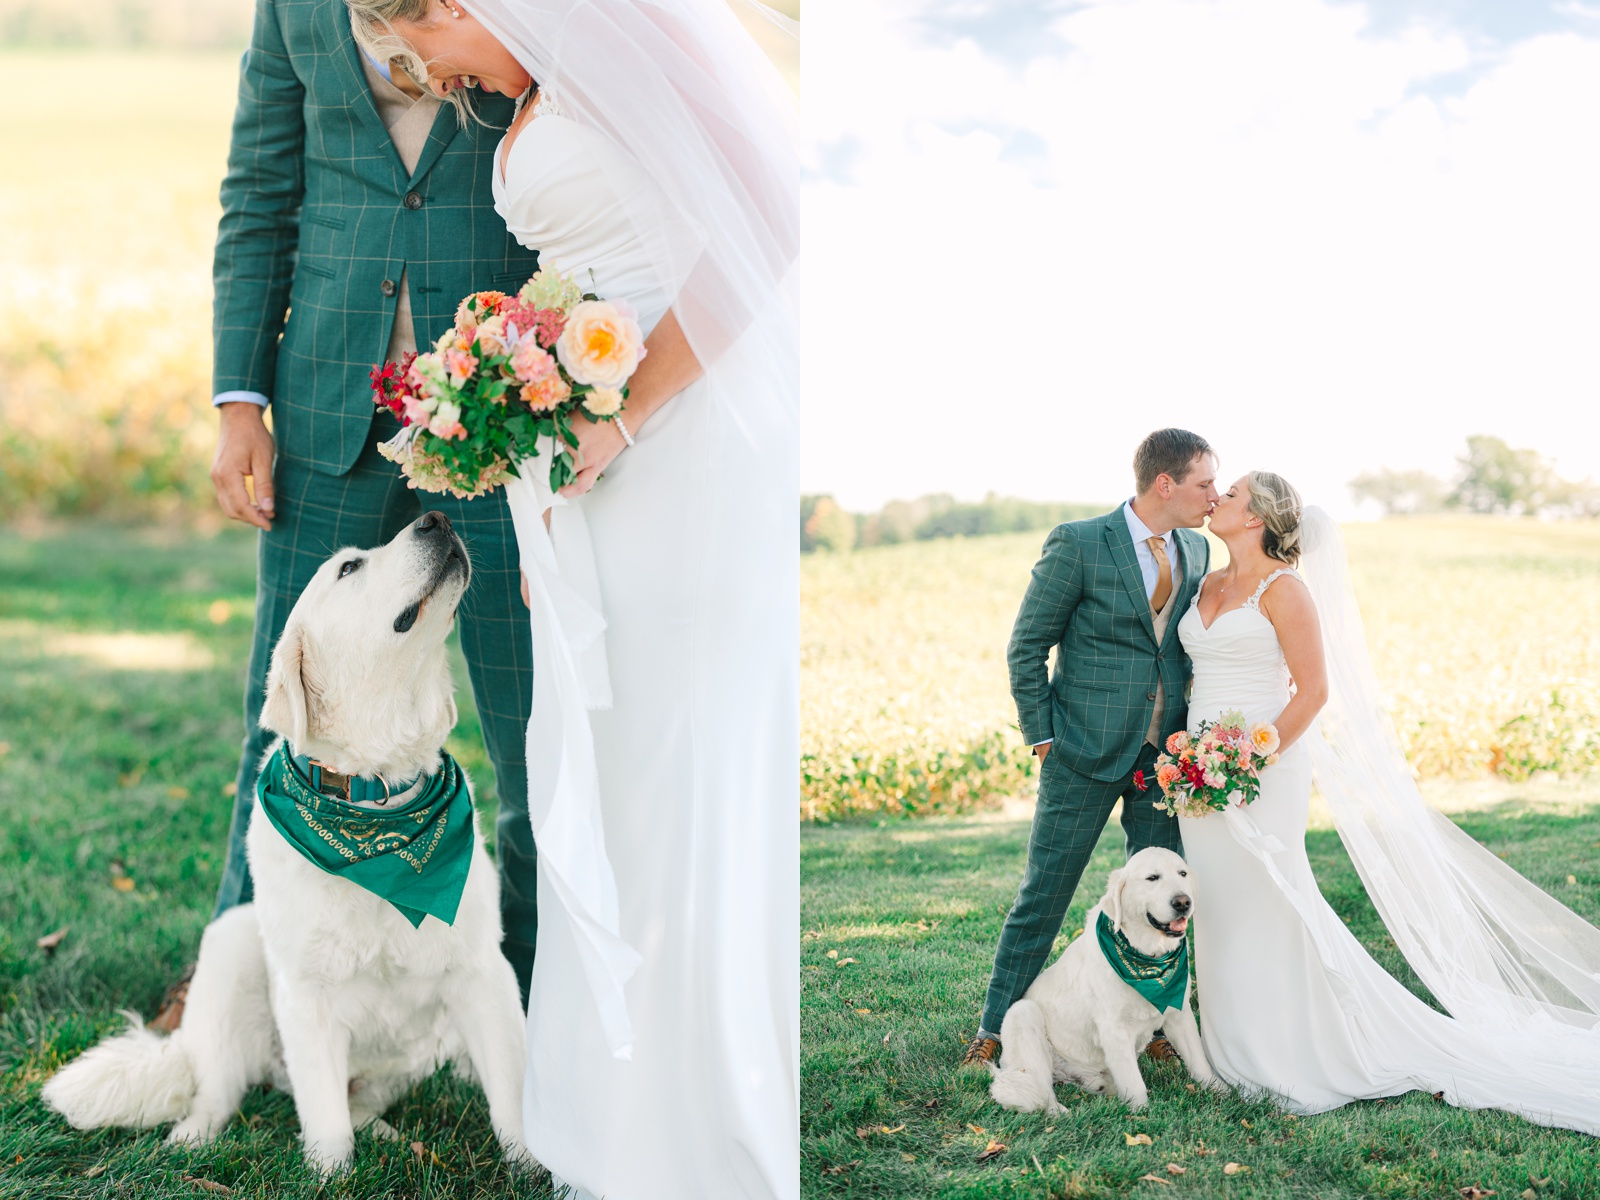 Emerald Green French Countryside inspired wedding at a Family Farm